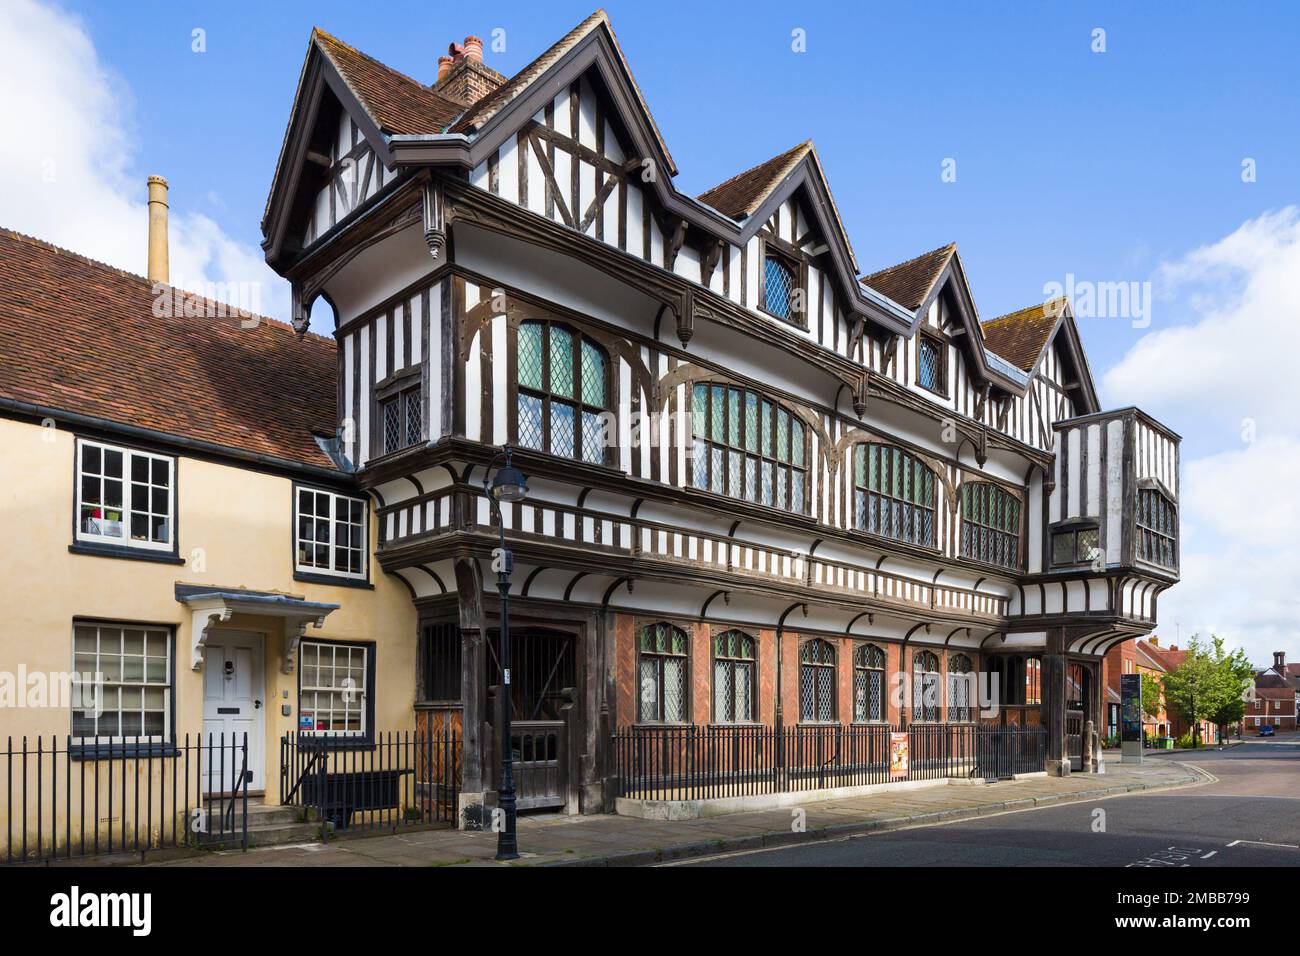 The Tudor House and Garden Museum, Southampton, an impressive timber-framed townhouse of c.1500. Stock Photo